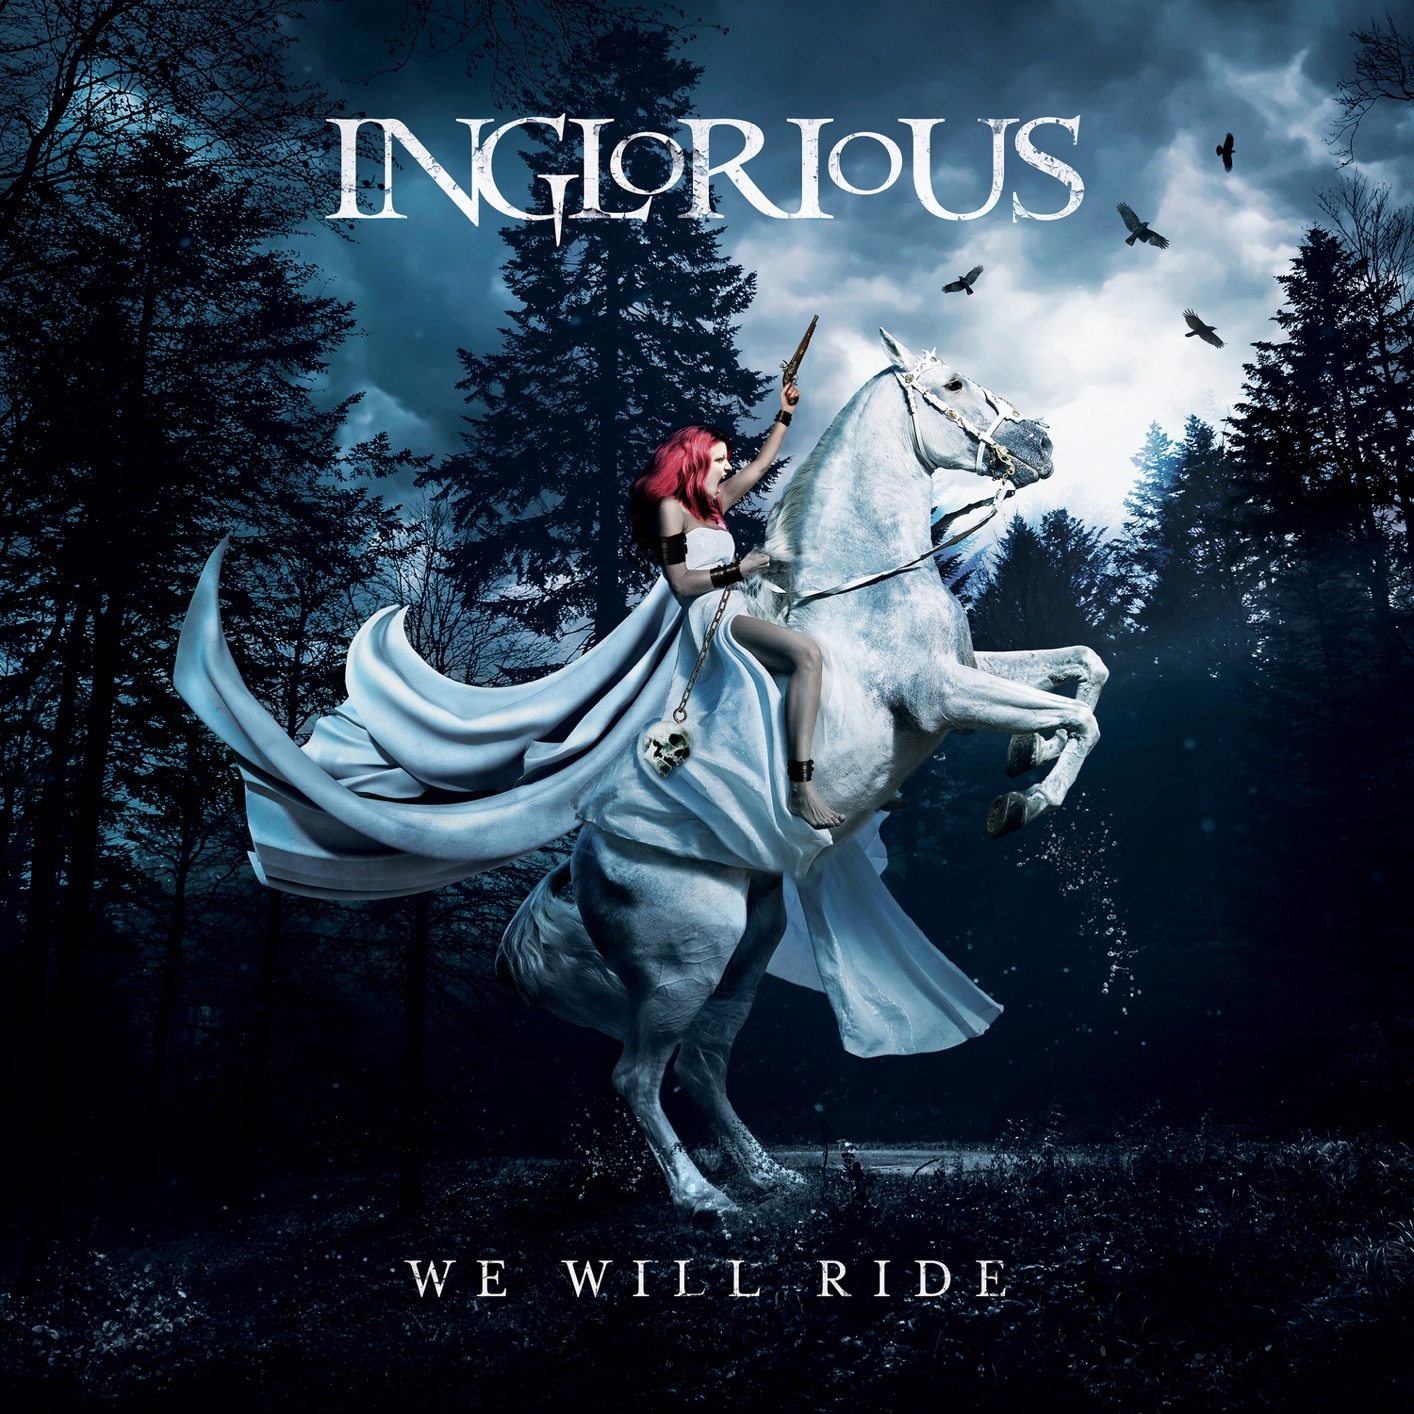 Inglorious - We Will Ride (2021) [FLAC 24bit/44,1kHz]